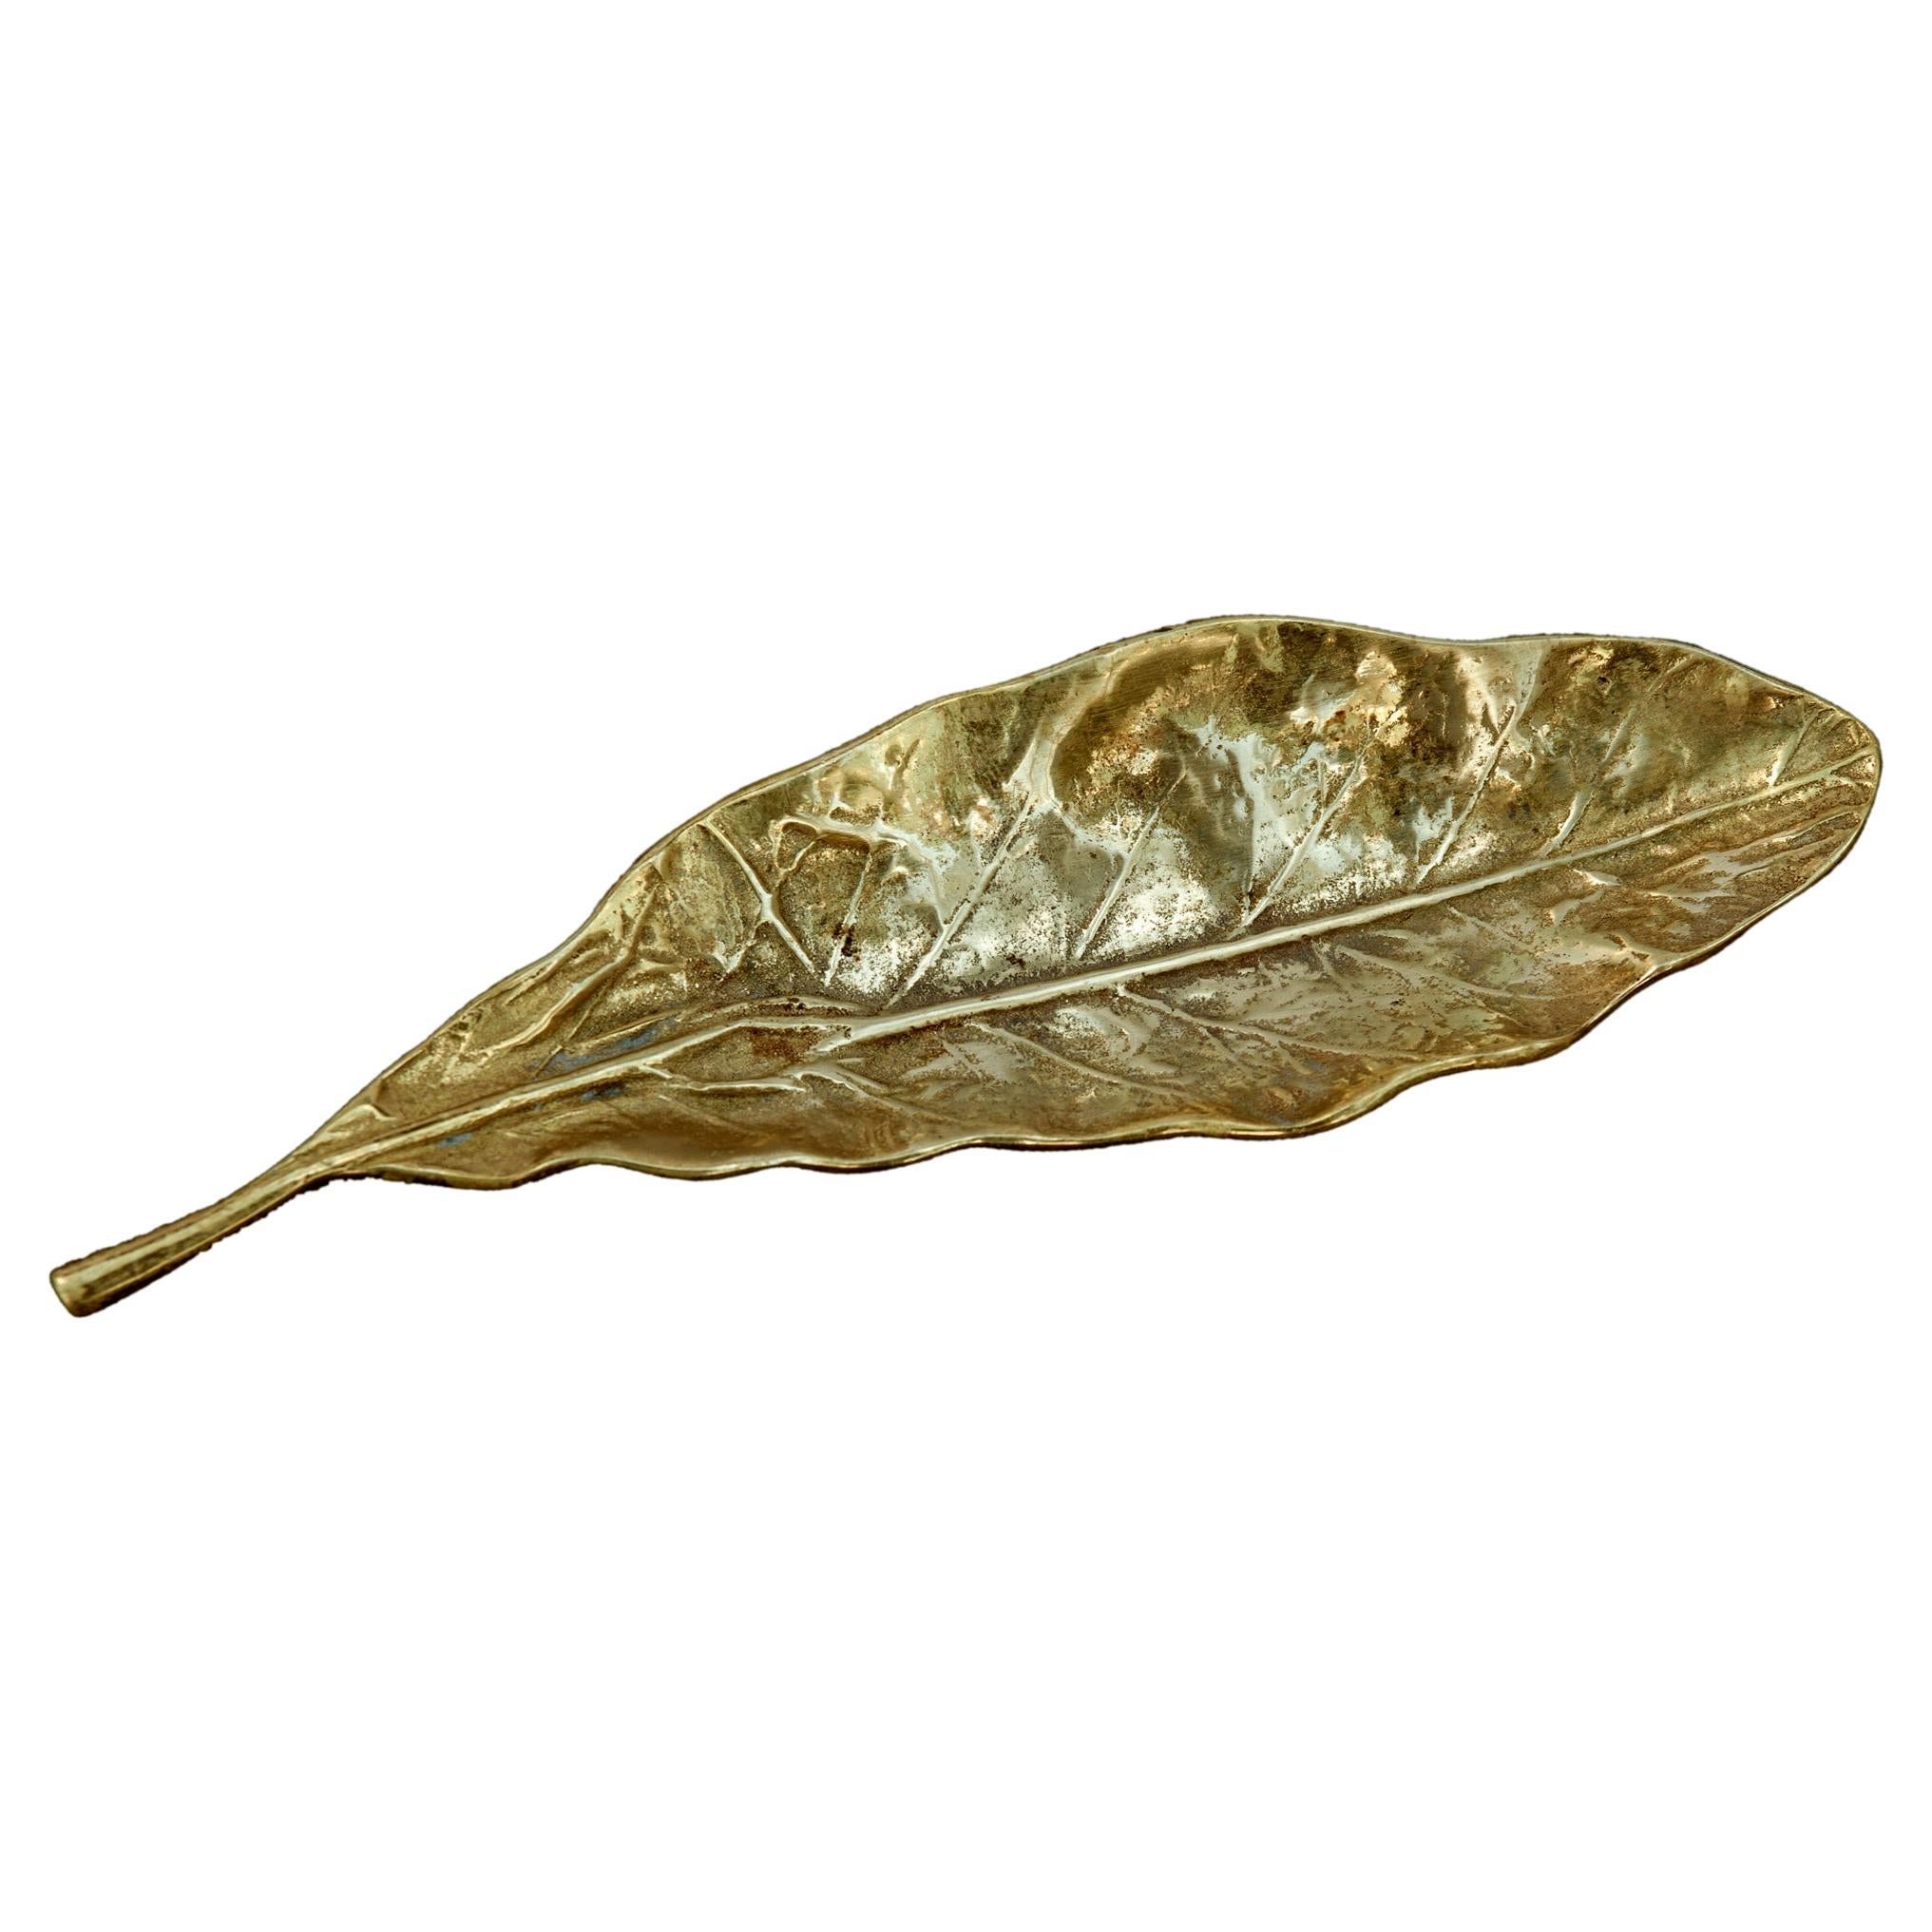 VTG  1963 Virginia Metalcrafters Solid Cast Brass Tobacco Leaf Trinket Dish
Perfect for holding small items like jewelry or coins, this dish is truly a one-of-a-kind piece. Whether you're a collector of brassware or simply appreciate the beauty of